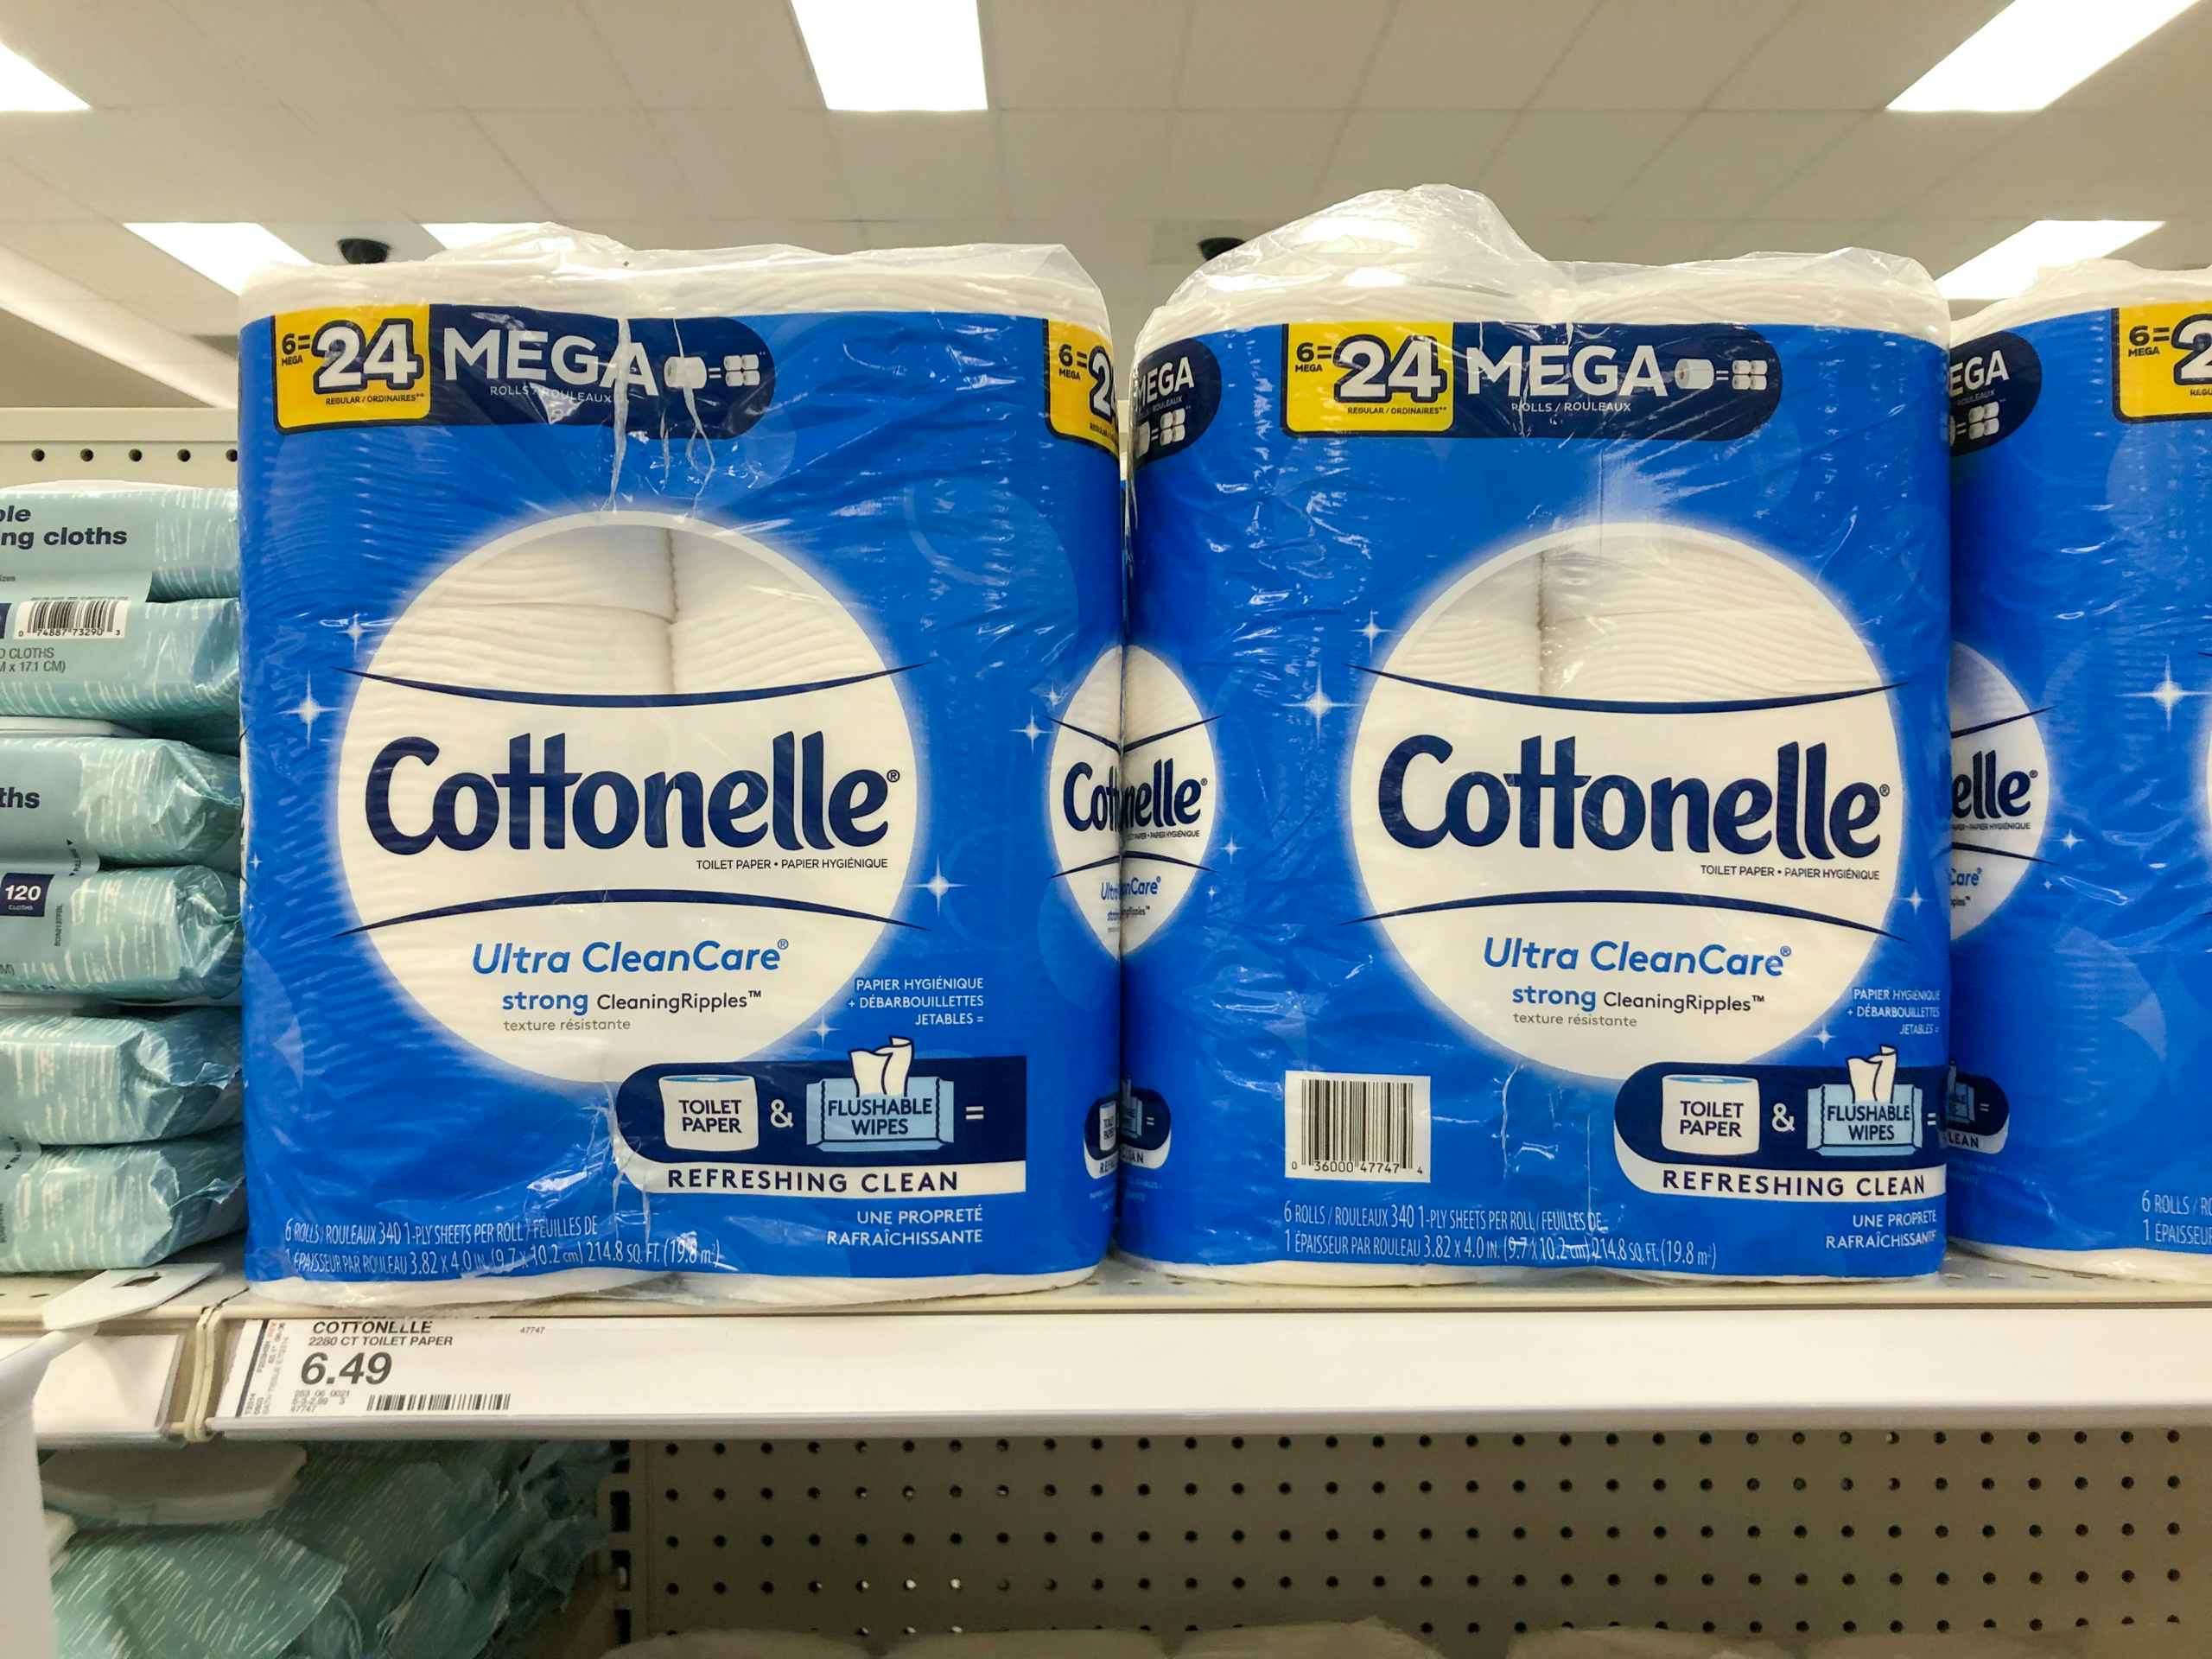 toilet paper packages on store shelf